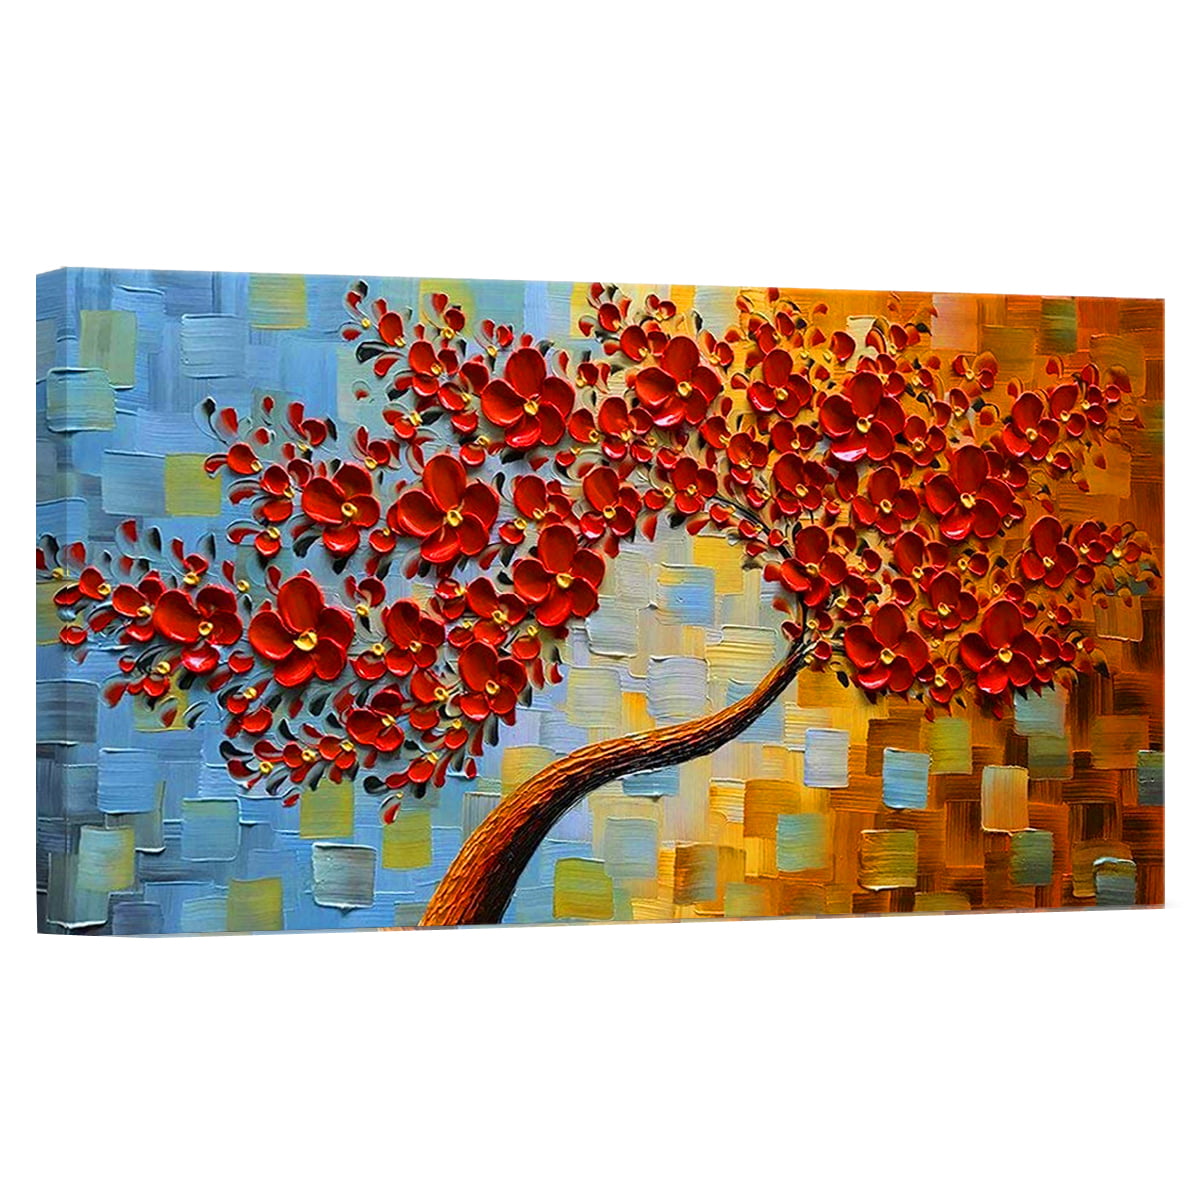 Abstract Tree Painting On Canvas Original Large Framed Colourful Wall art Acrylic Heavy Texture Painting For Living Room Home Decor